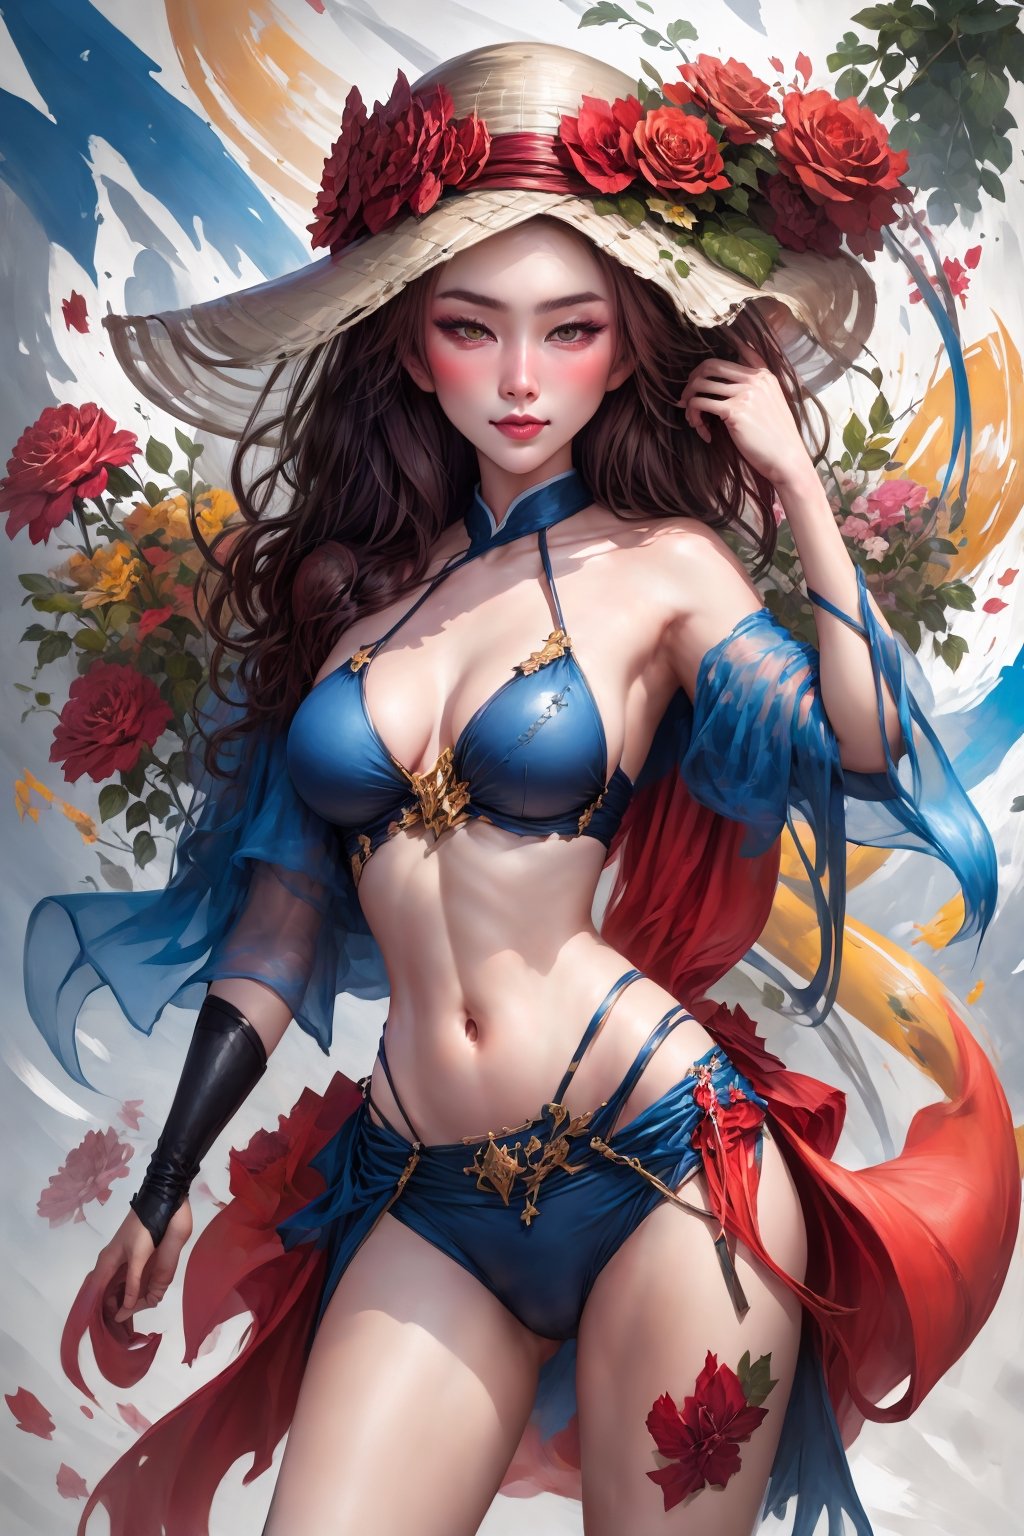 Create a detailed close-up illustration that captures the essence of a character wearing a bikini, inspired by Playboy, fantasy artwork and the aesthetic of a bikini, abstract, Enhanced, NDP, Miss Vietnamese girls are attractive and moving